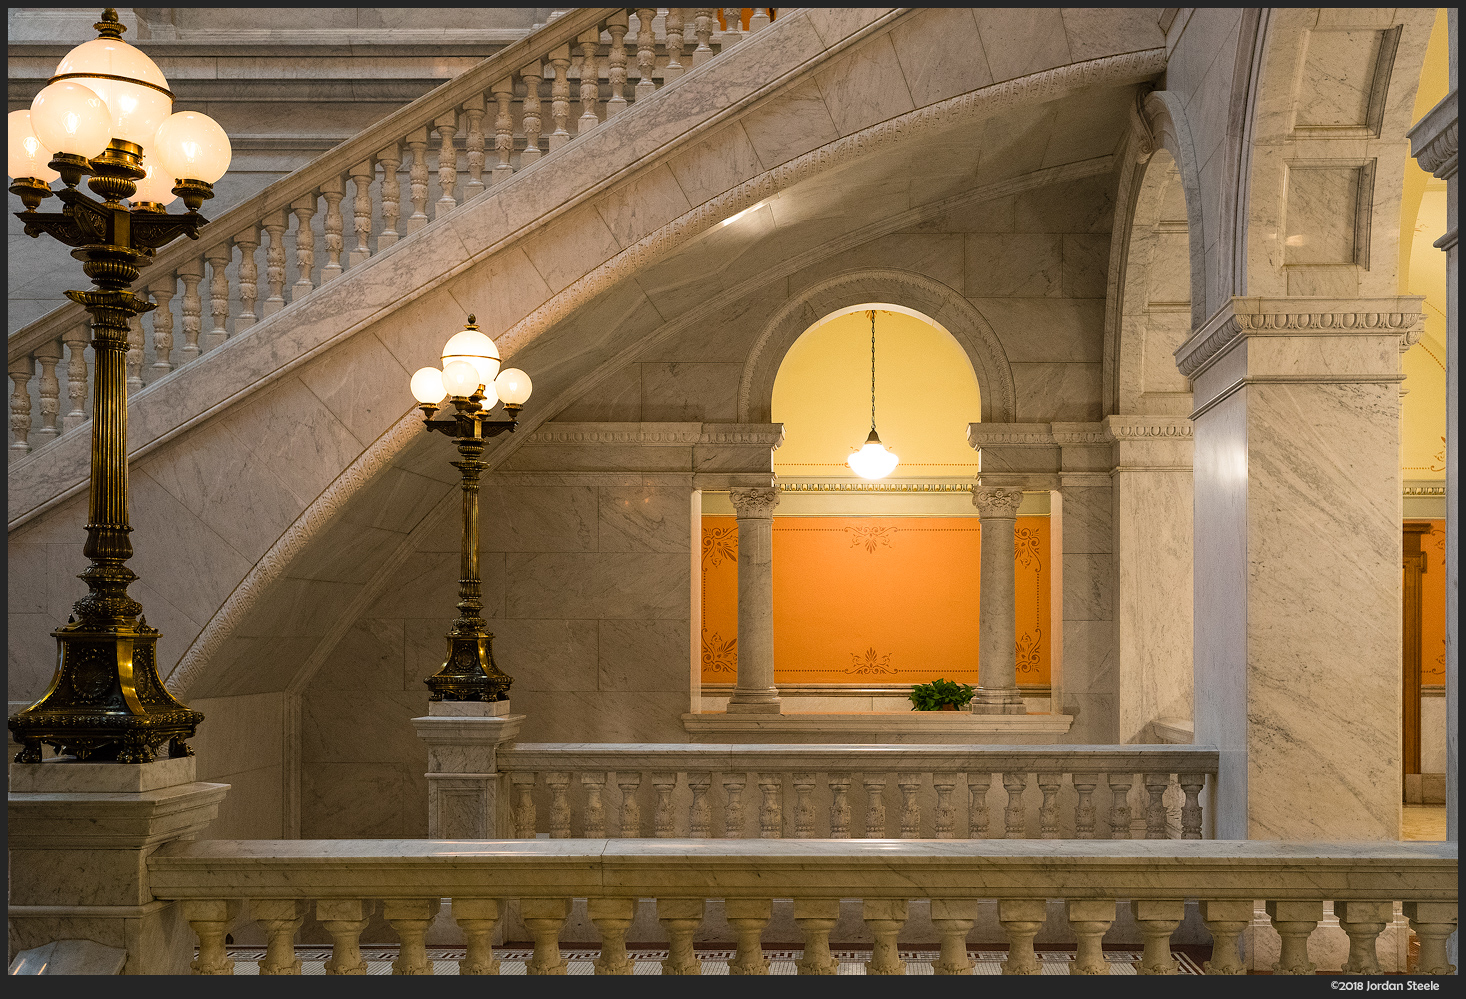 Statehouse Arches - Sony A7 II with Voigtländer 35mm f/1.4 Nokton Classic @ f/5.6, 